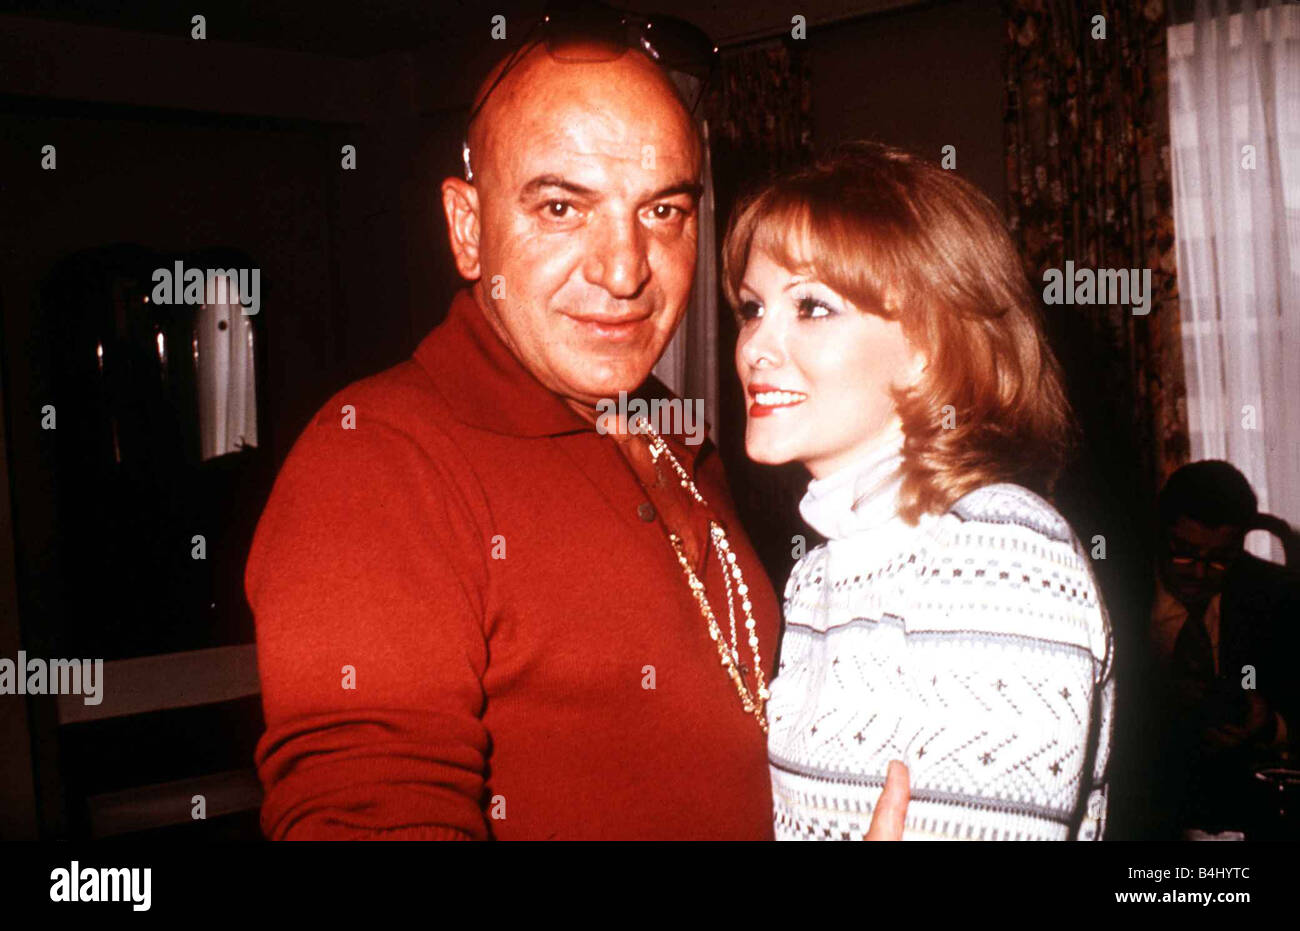 Telly Savalas the actor from Kojak with his girlfriend Marce Hamsen February 1977 Dbase Msi Stock Photo